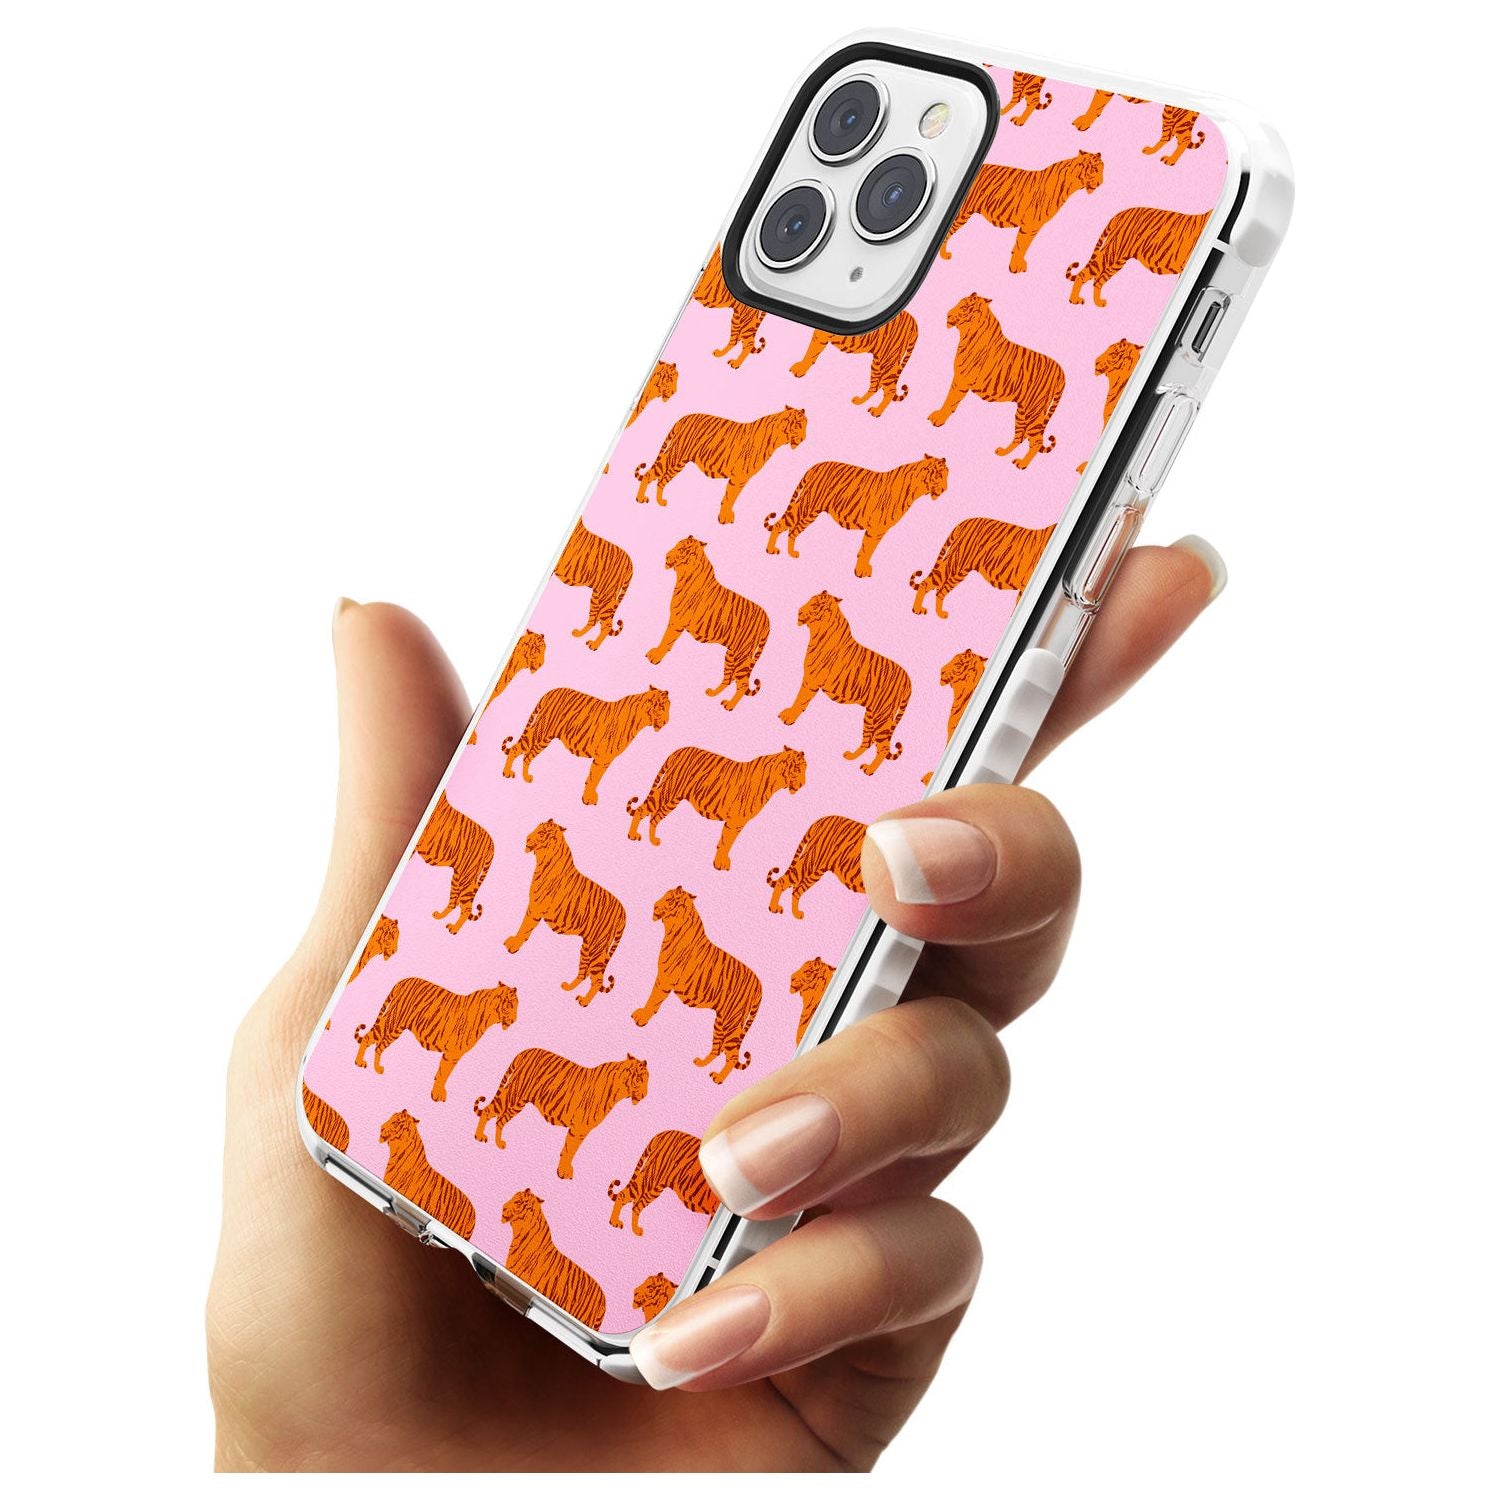 Tigers on Pink Pattern Impact Phone Case for iPhone 11 Pro Max